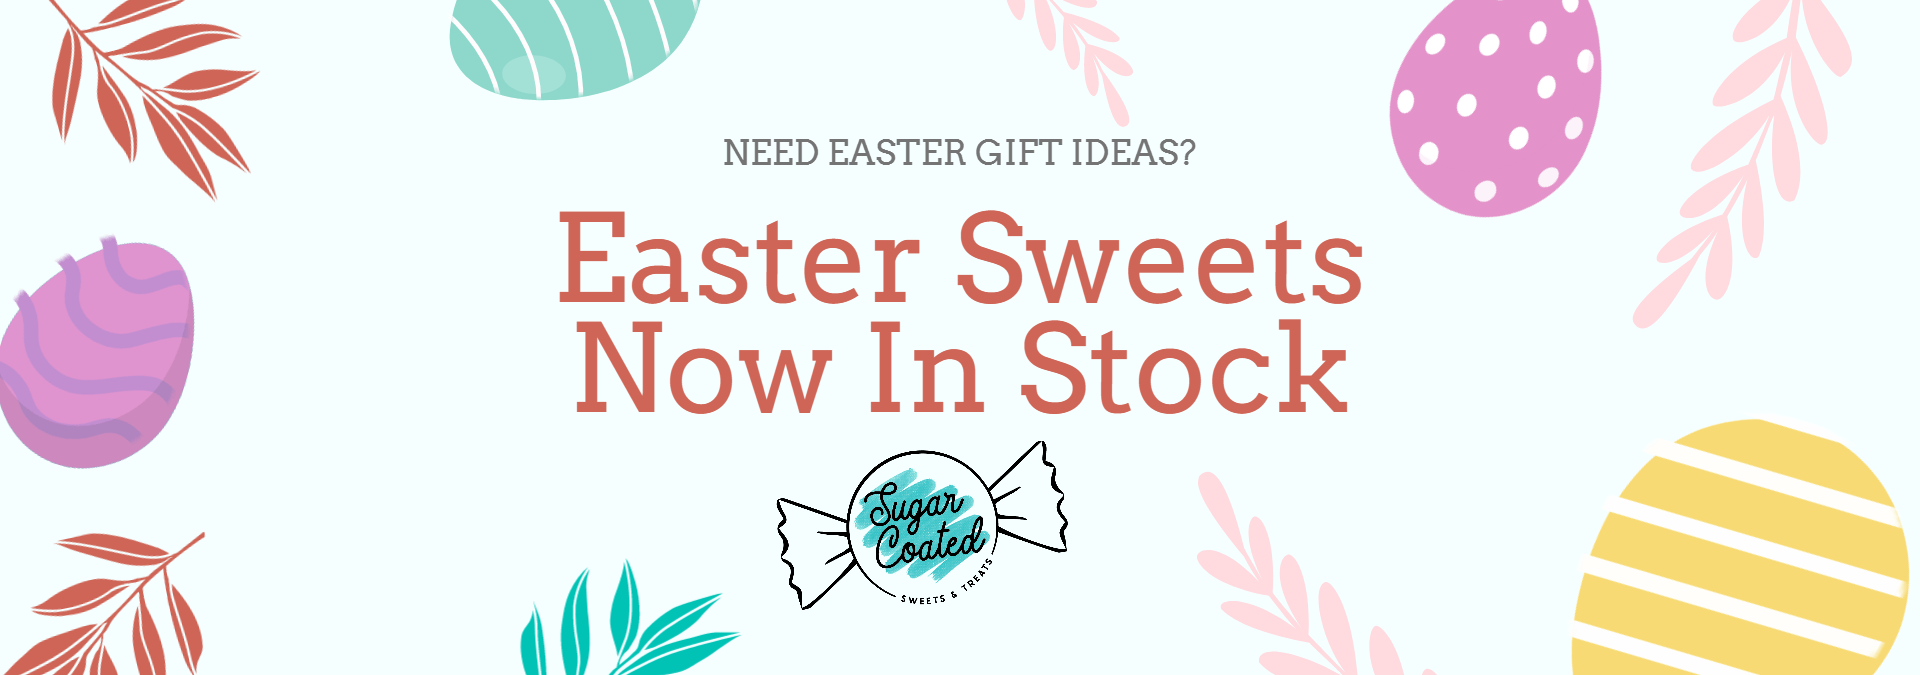 easter sweets are now in stock with easter eggs and leaves .